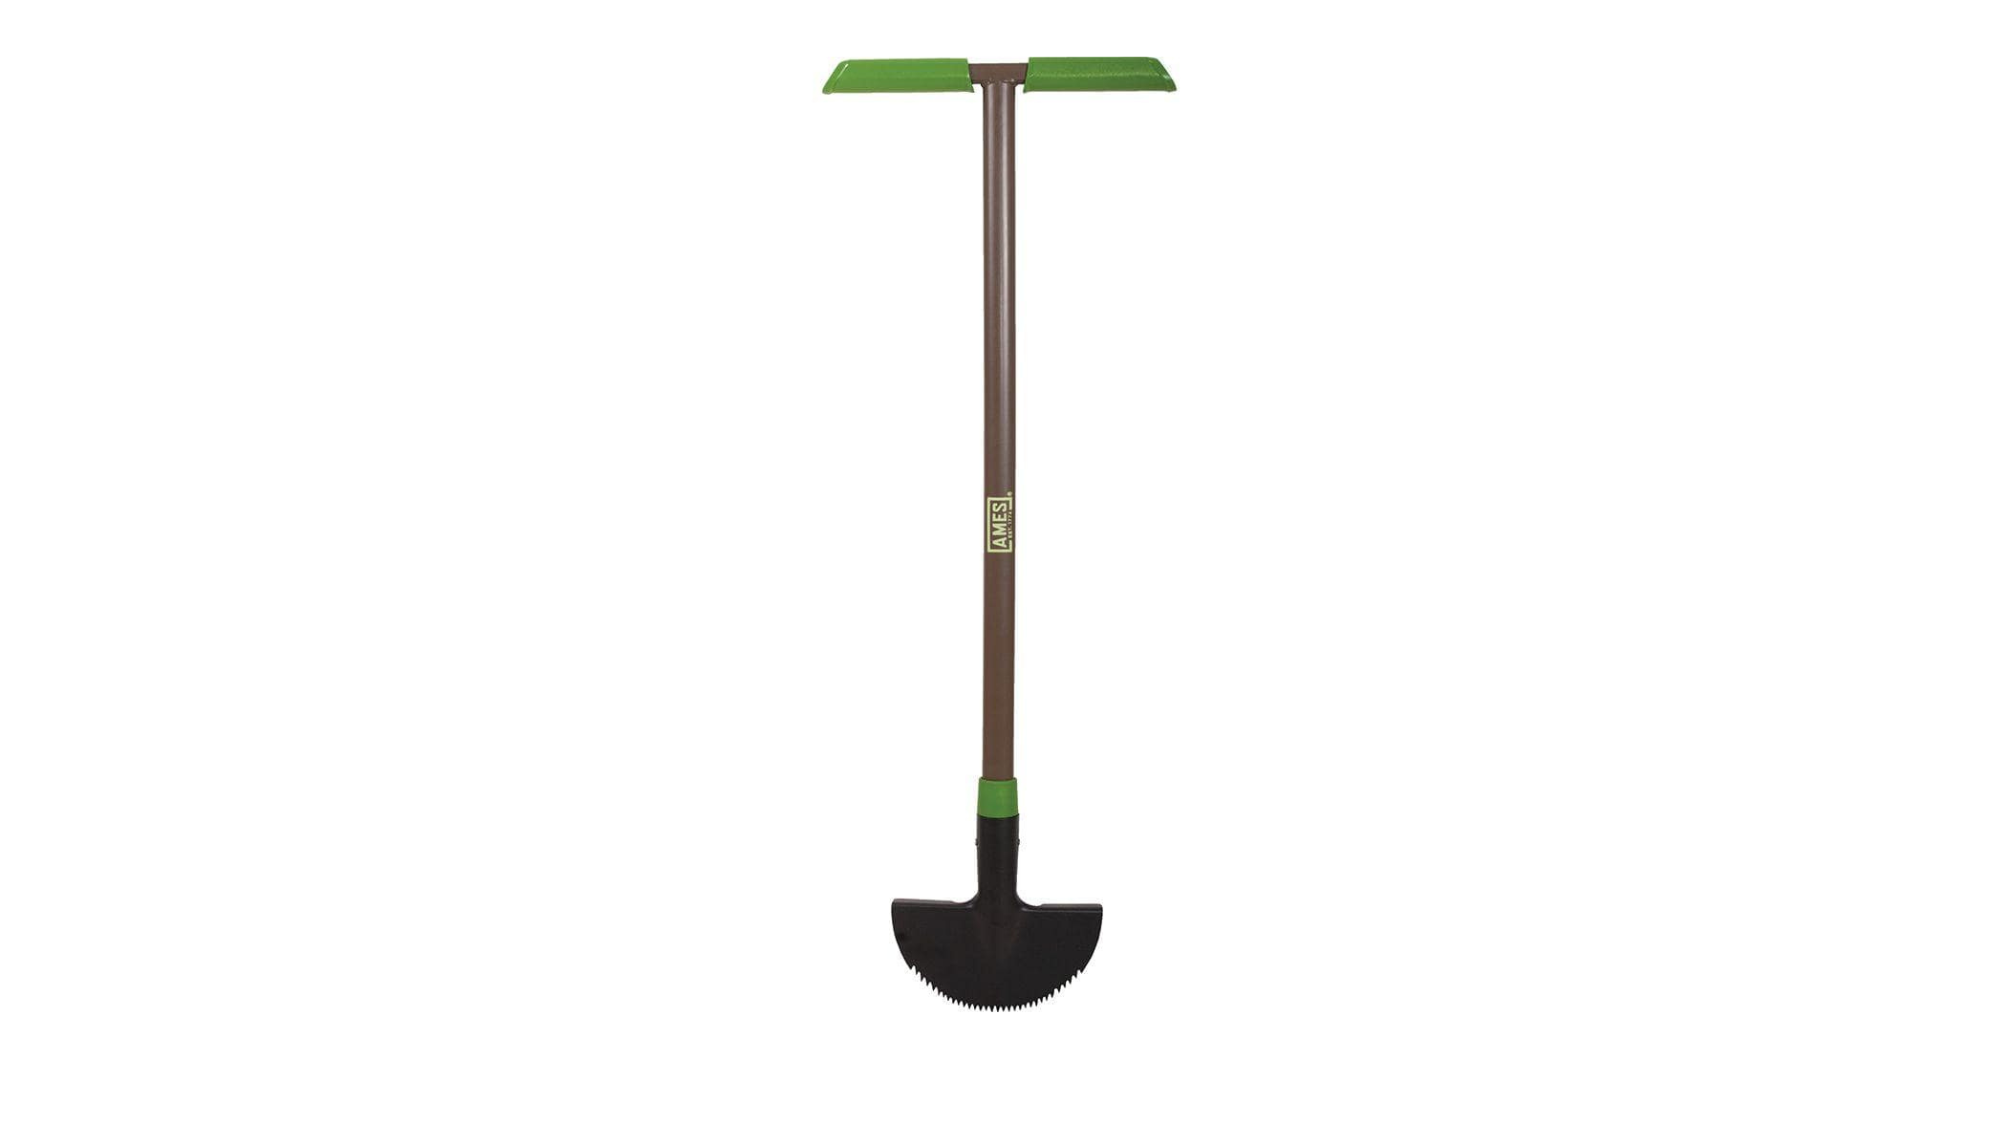 Ames steel landscaping edger with T-shape handle on white background